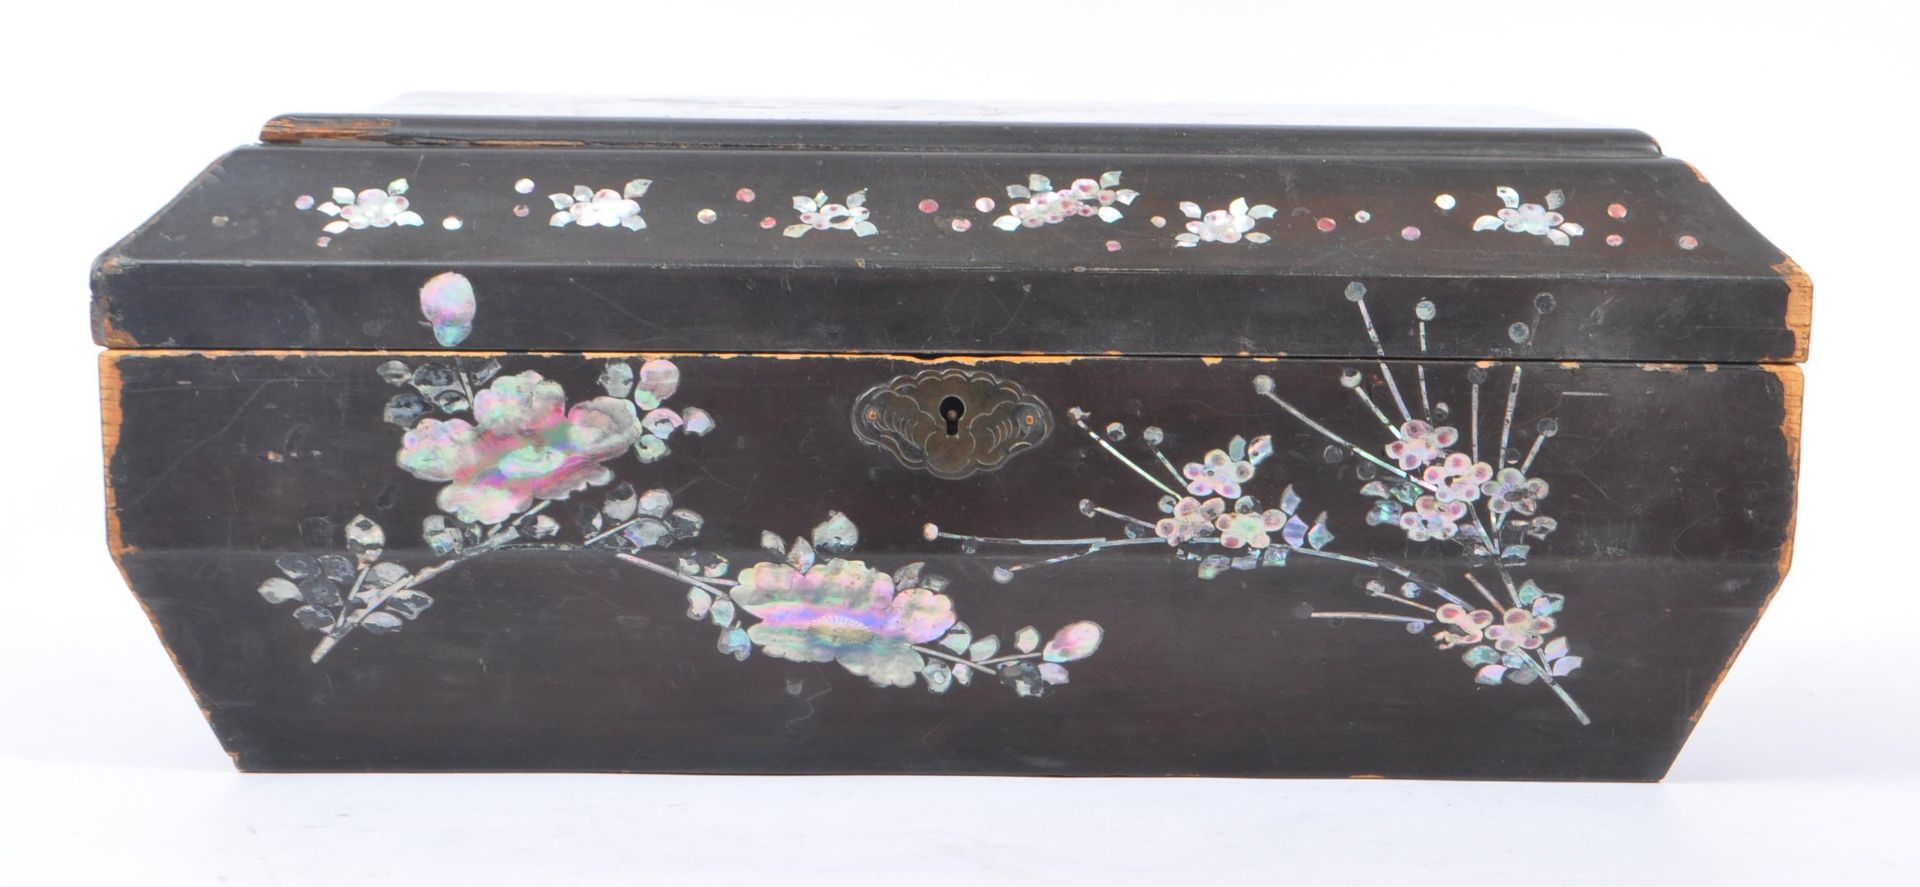 EARLY 20TH CENTURY CHINESE MOTHER OF PEARL SEWING BOX - Image 5 of 7